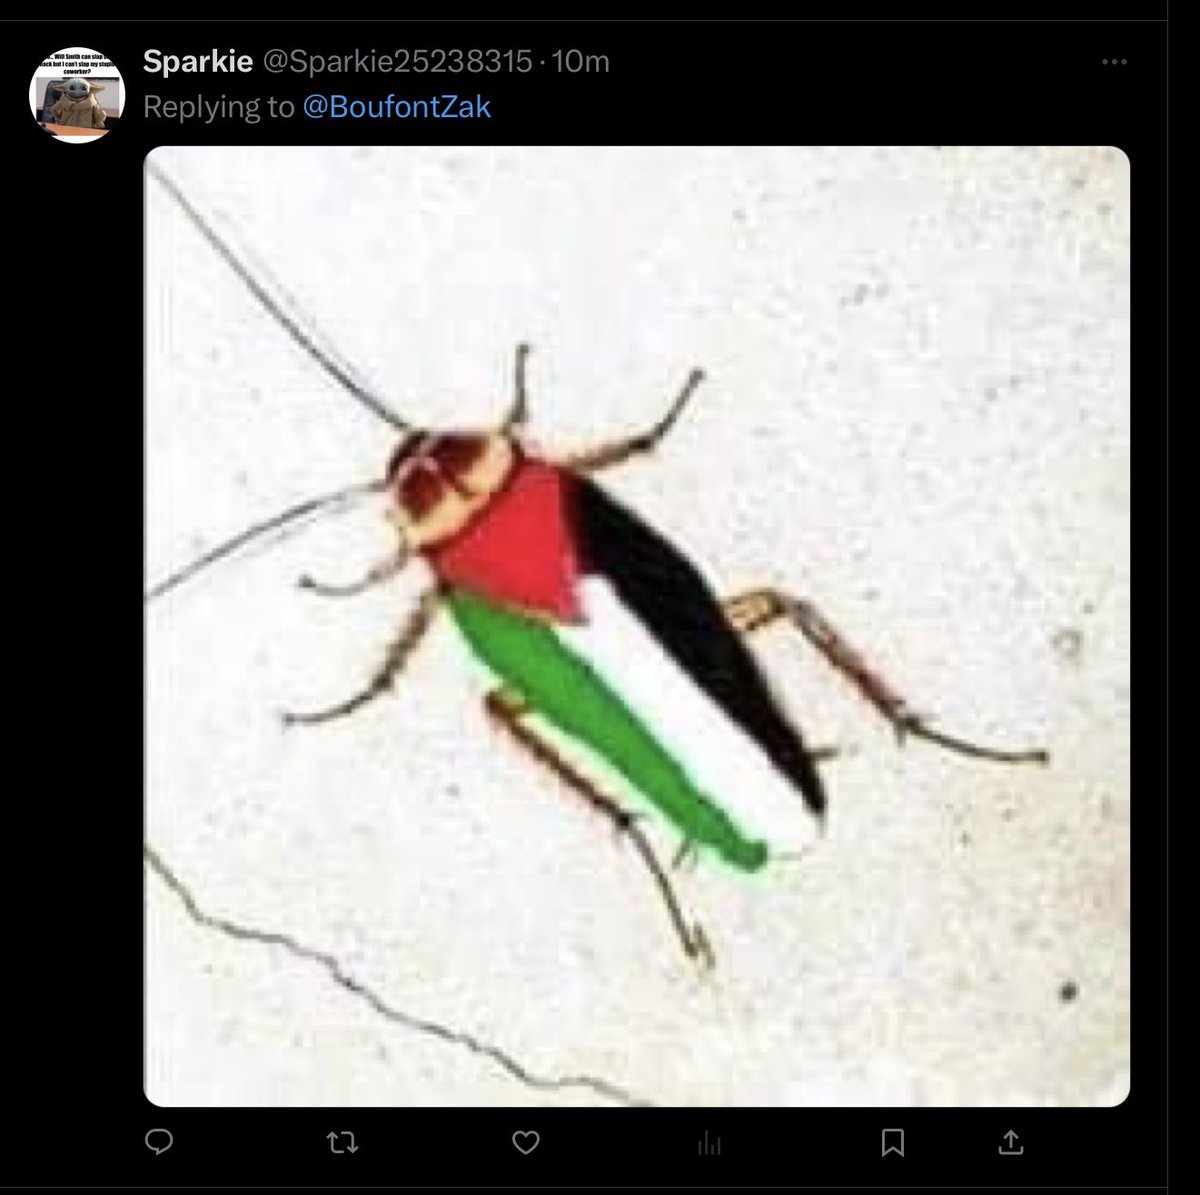 I really don’t understand why these sick Zionists send me Tweets like this, it does nothing but confirm my opinion that they are very sick racists with a disturbing deranged objective. #FreePalestine ✊🏾 🇵🇸 ❣️